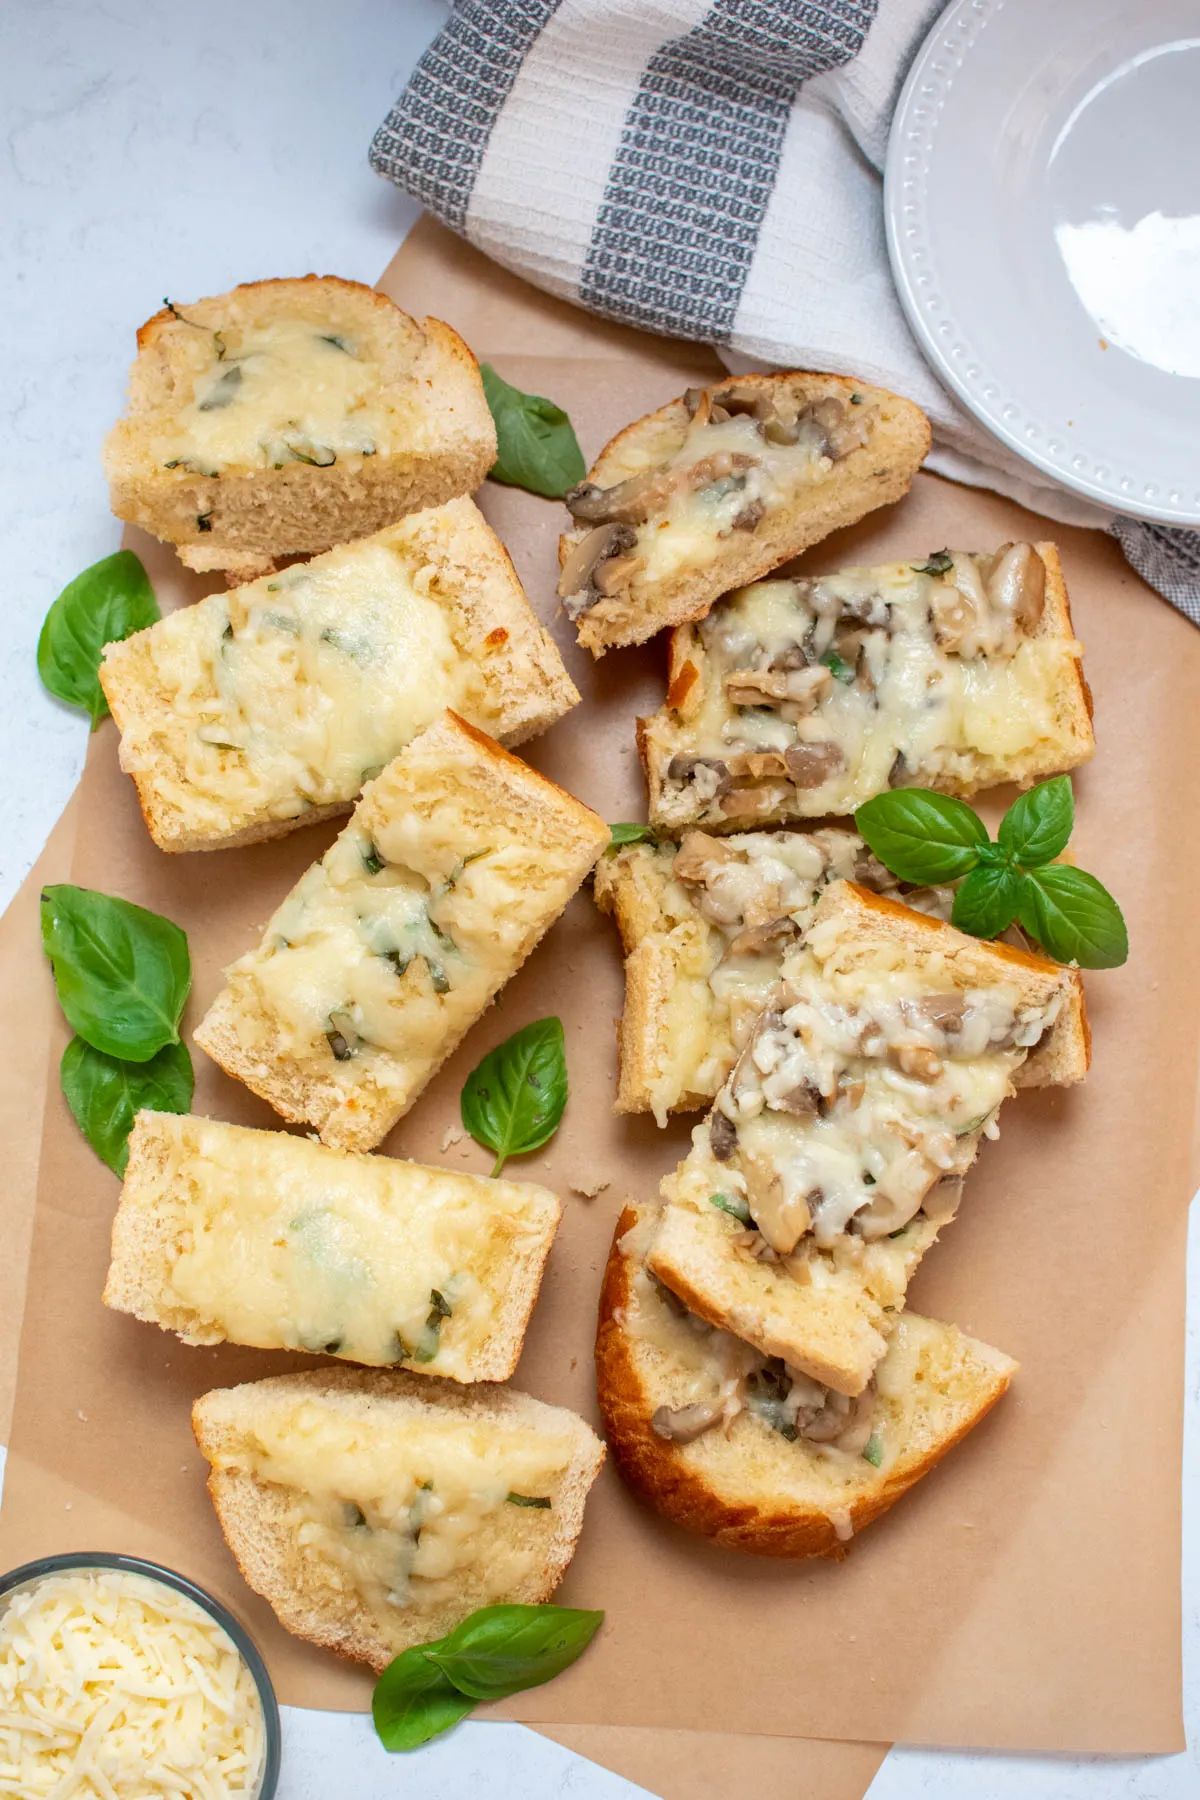 Pieces of cheesy bread with basil, mozzarella, and mushrooms, on brown parchment paper.